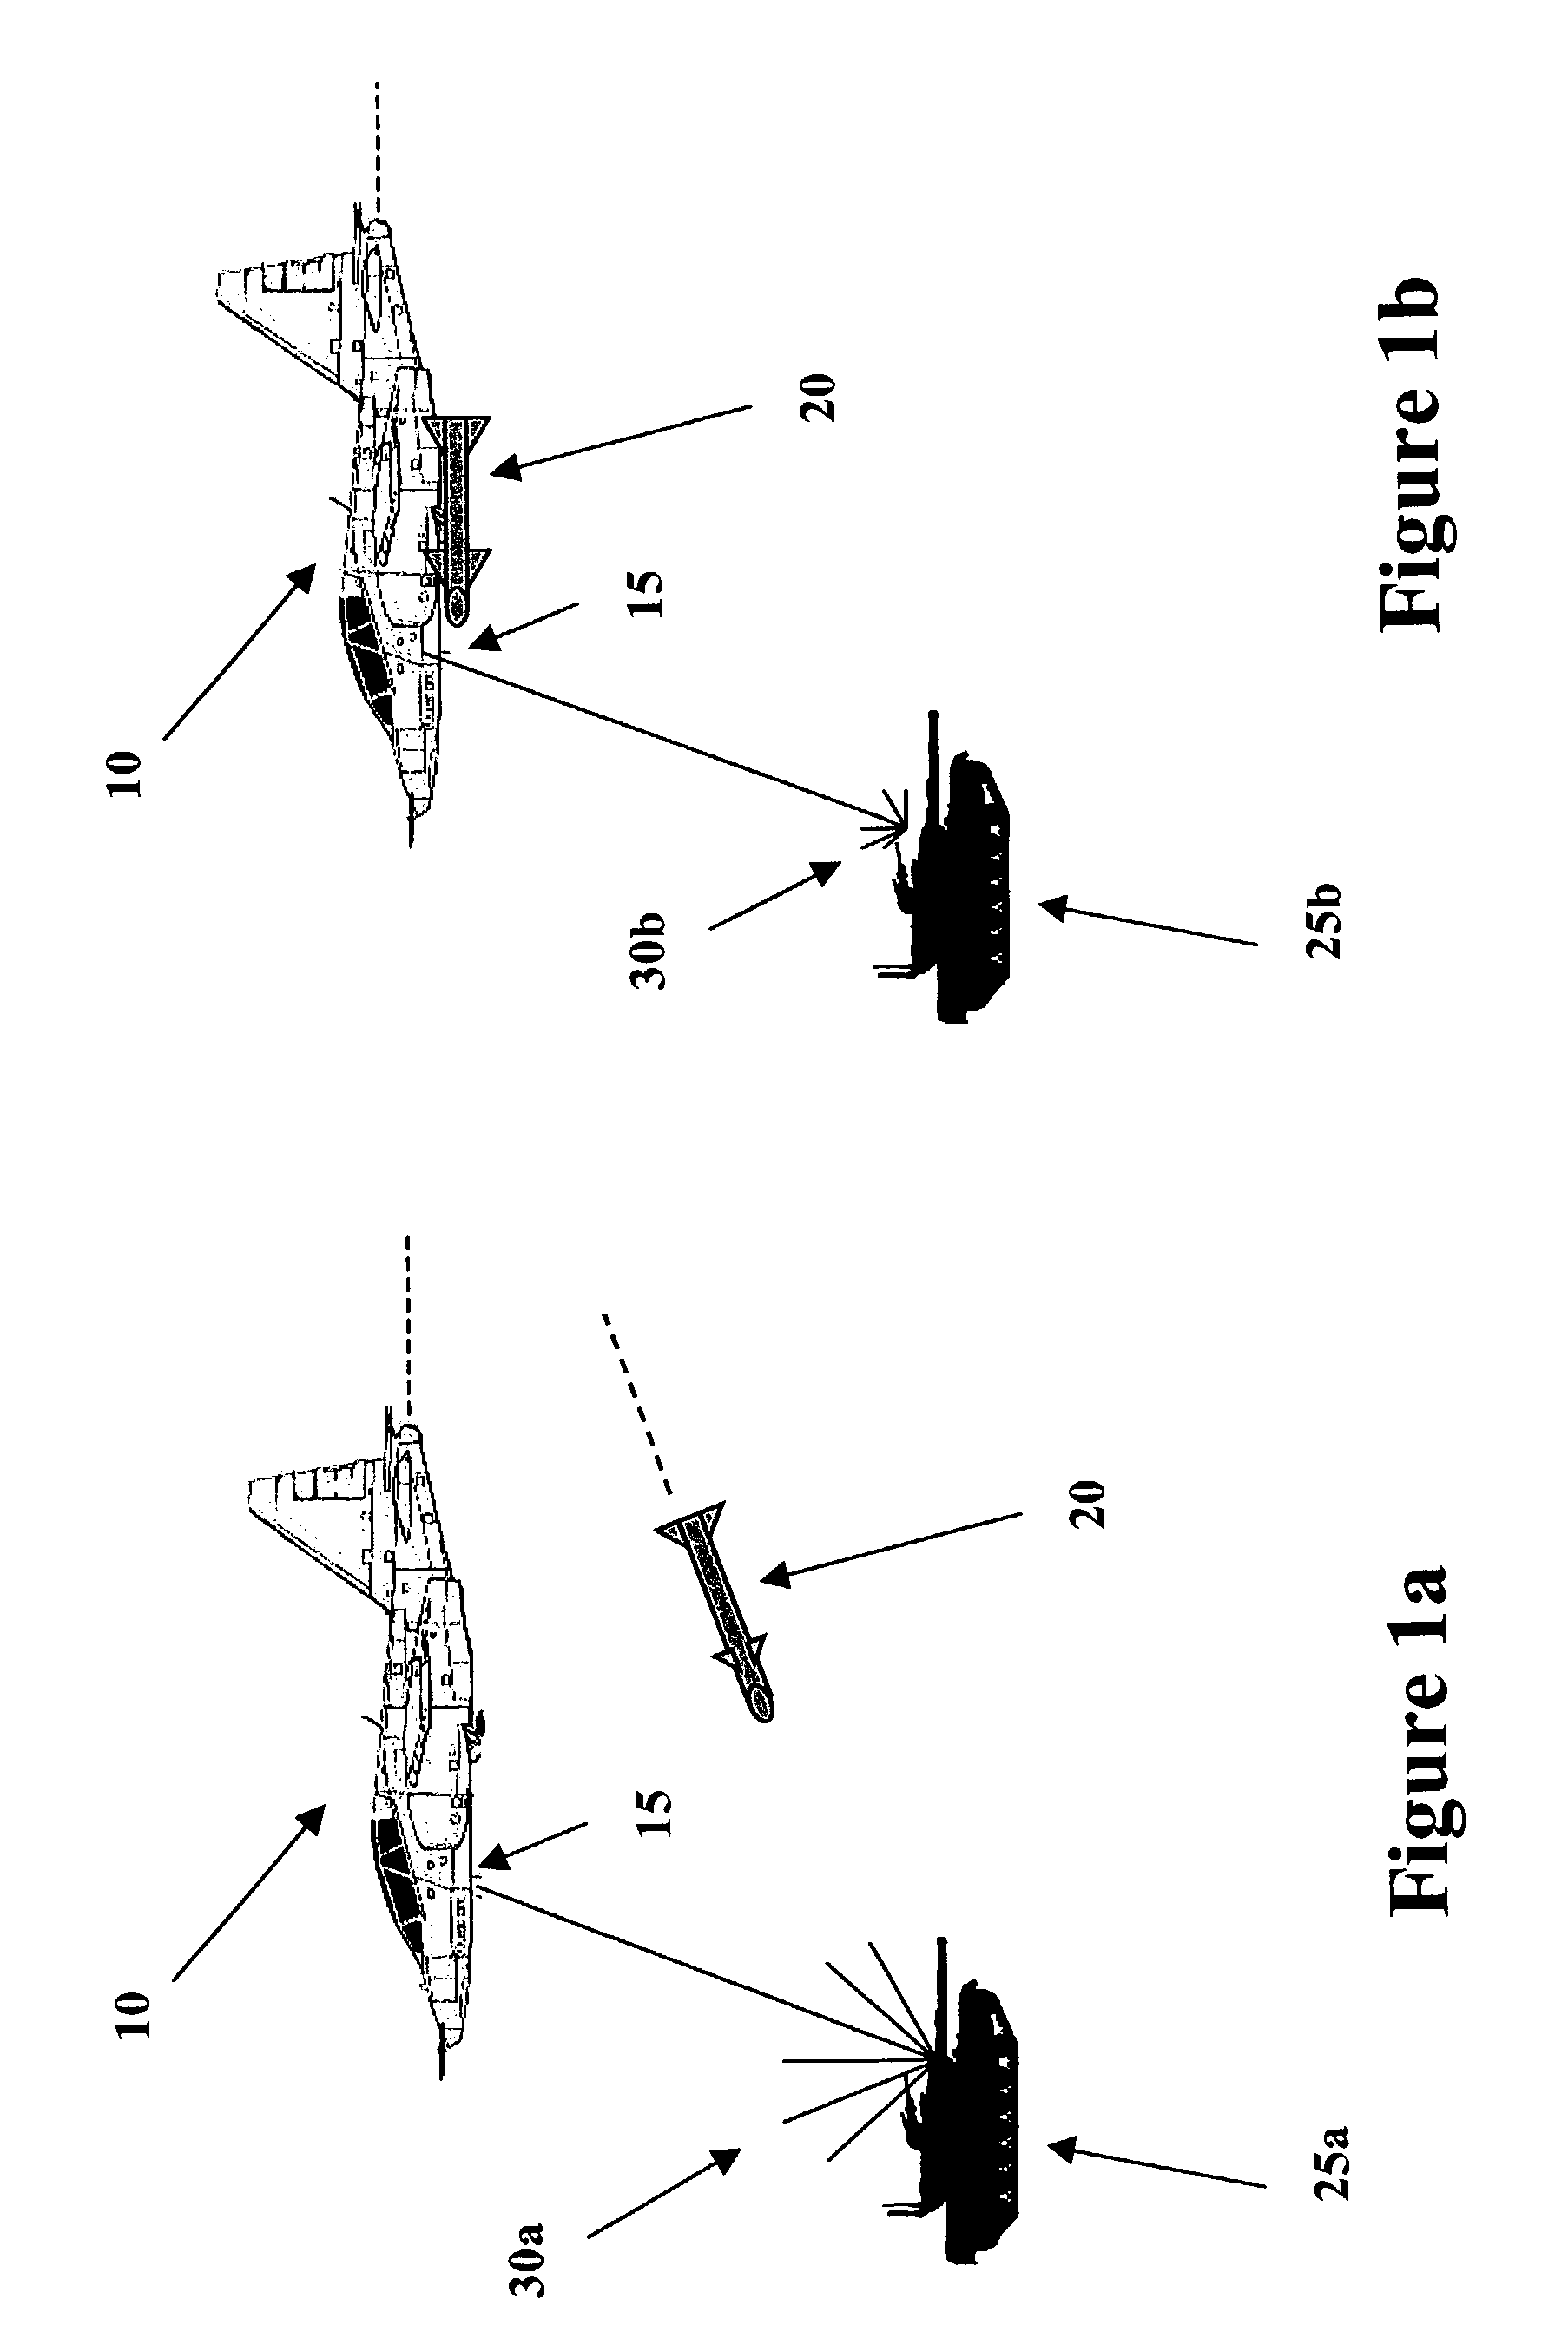 Method and system for countering laser technology